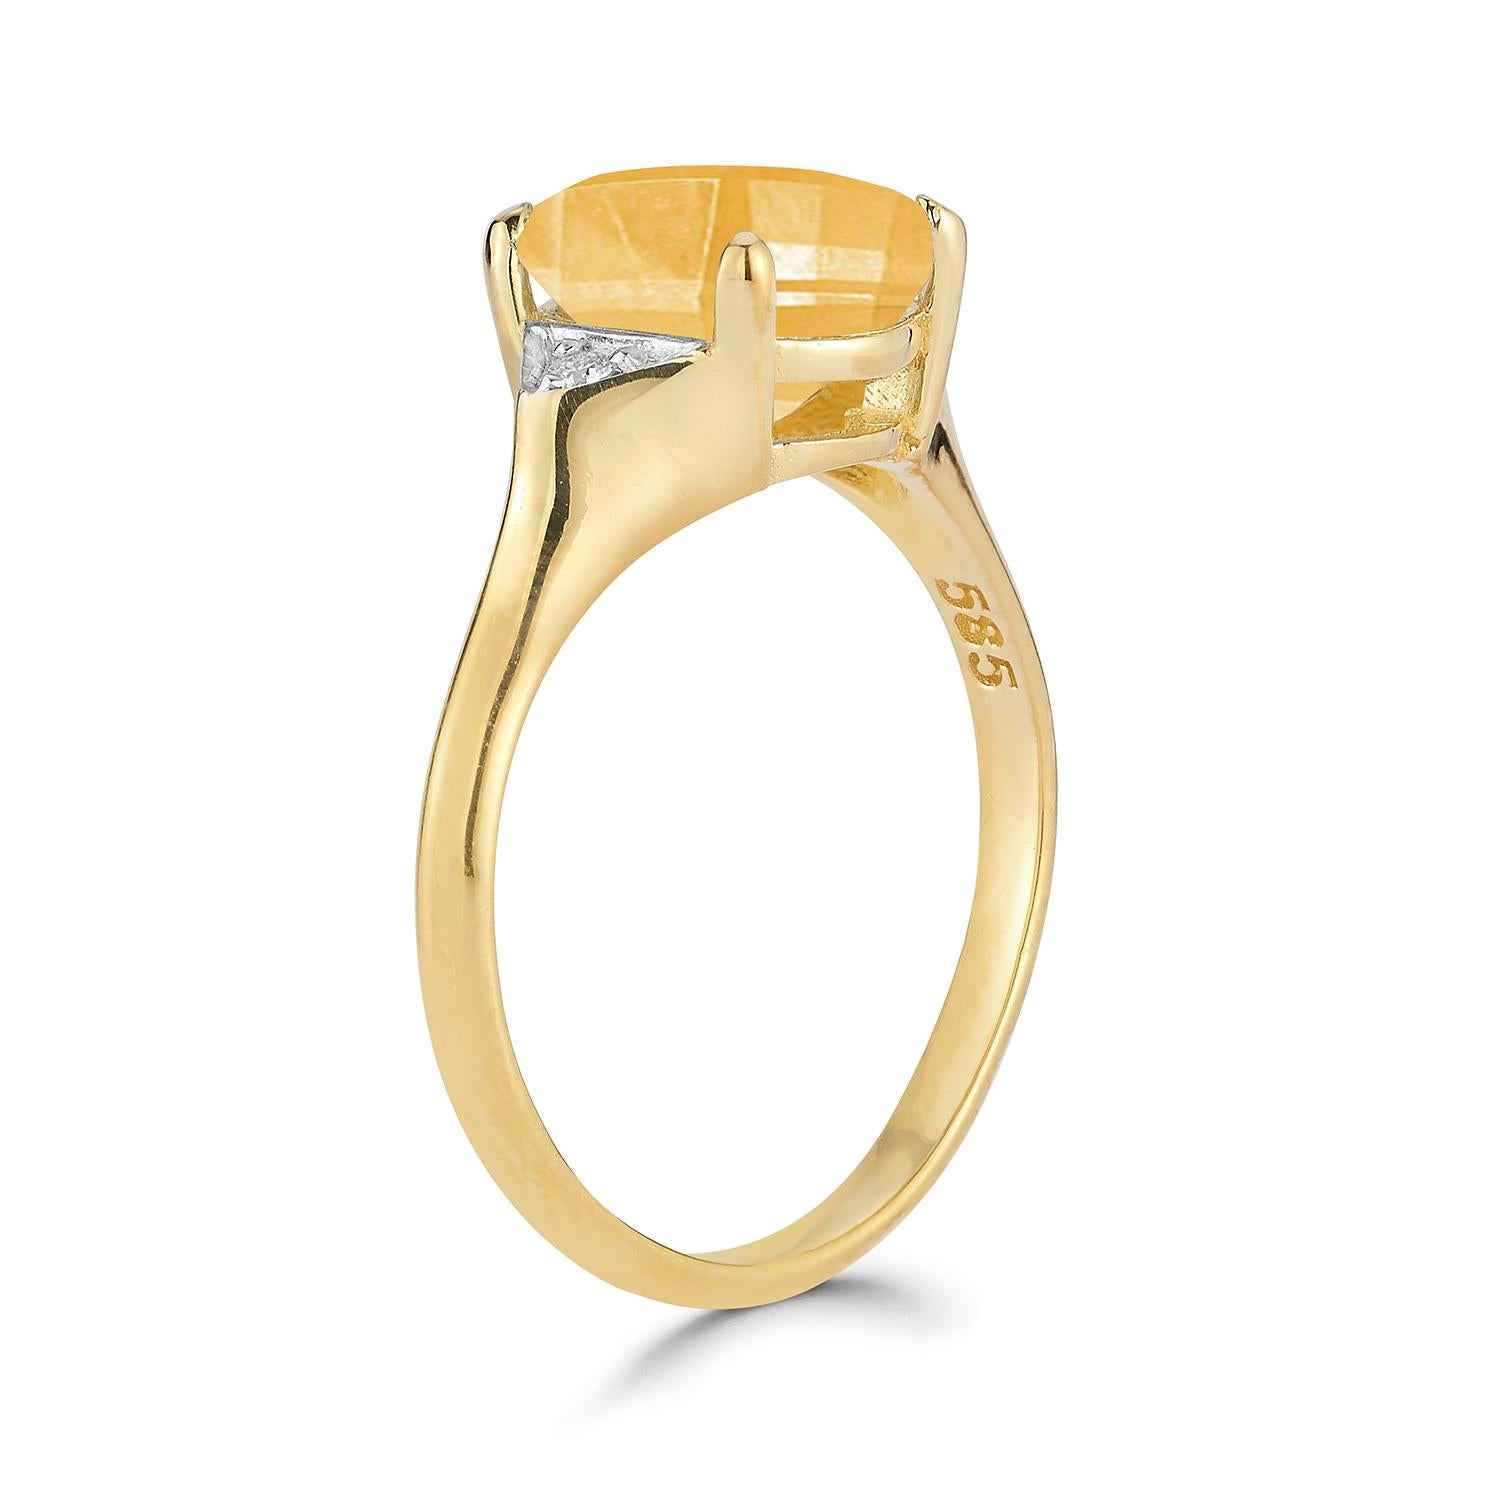 For Sale:  Hand-Crafted 14K Yellow Gold 0.05 ct. tw. Diamond & 4.75CT Citrine Cocktail Ring 3